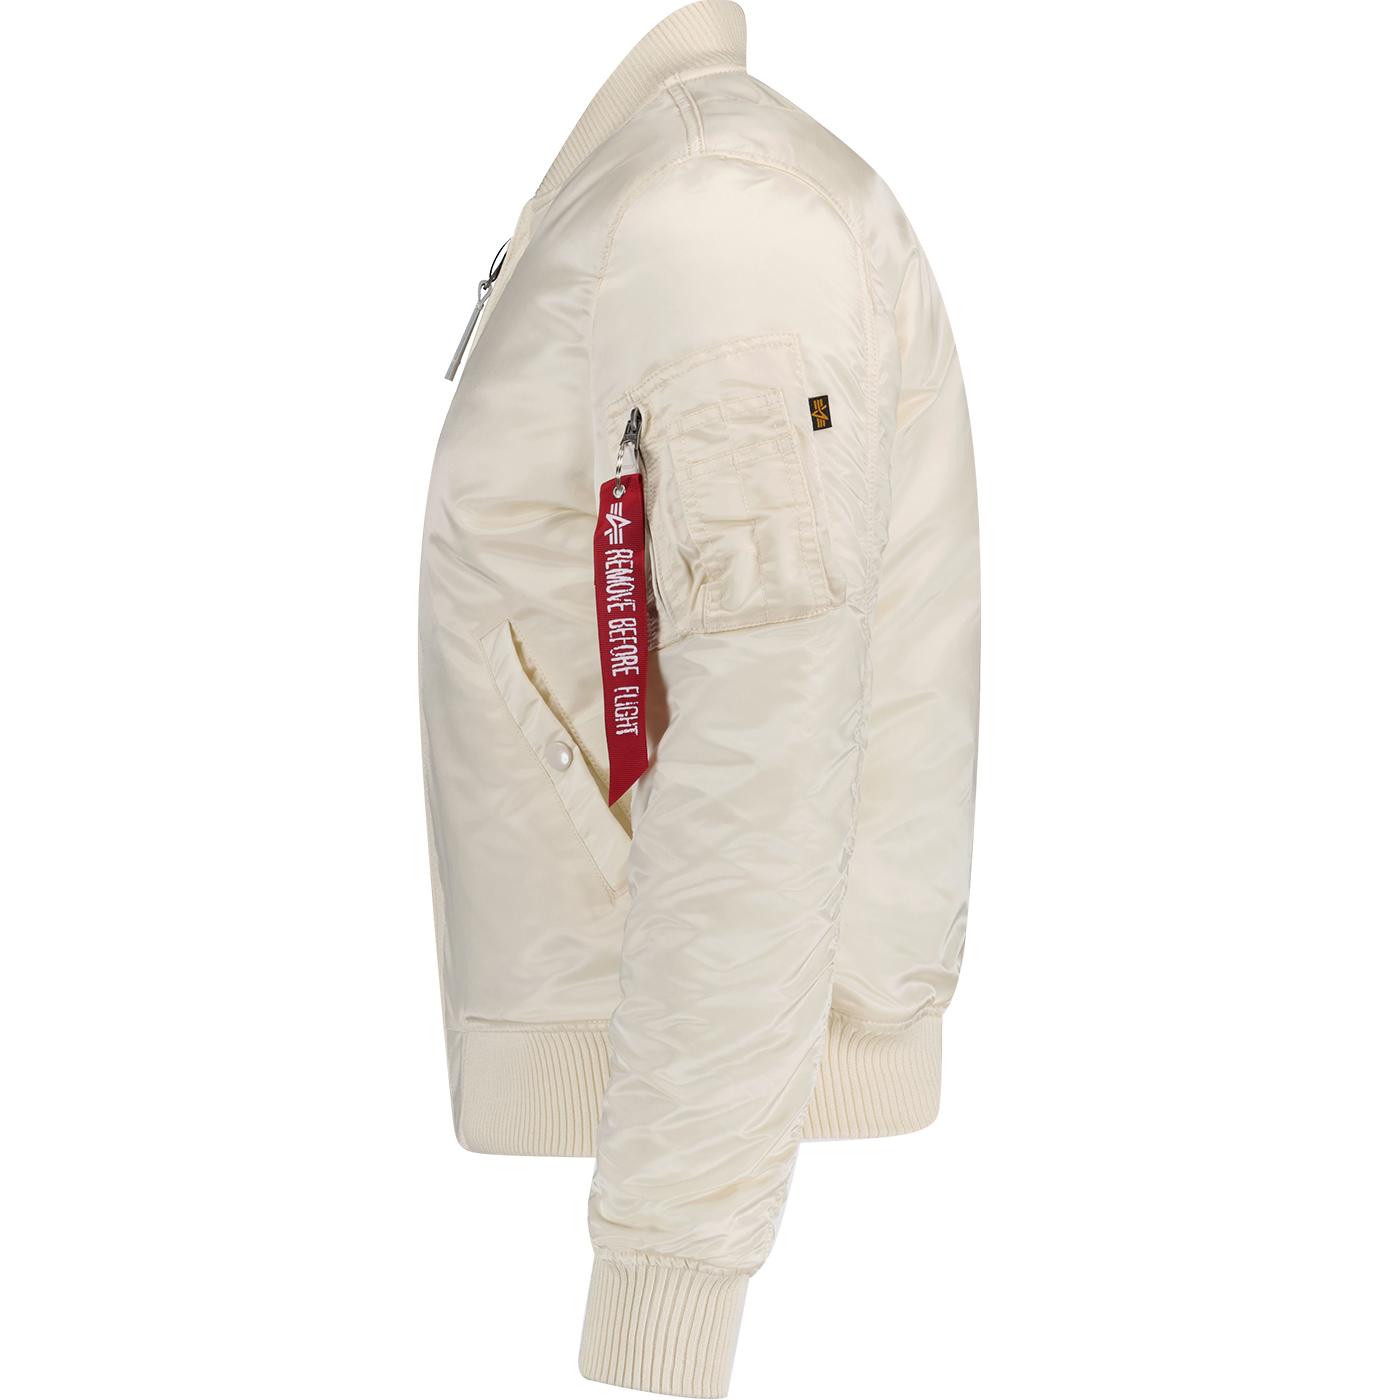 ALPHA Industries MA1 VF Jacket in Mod Stream White Bomber